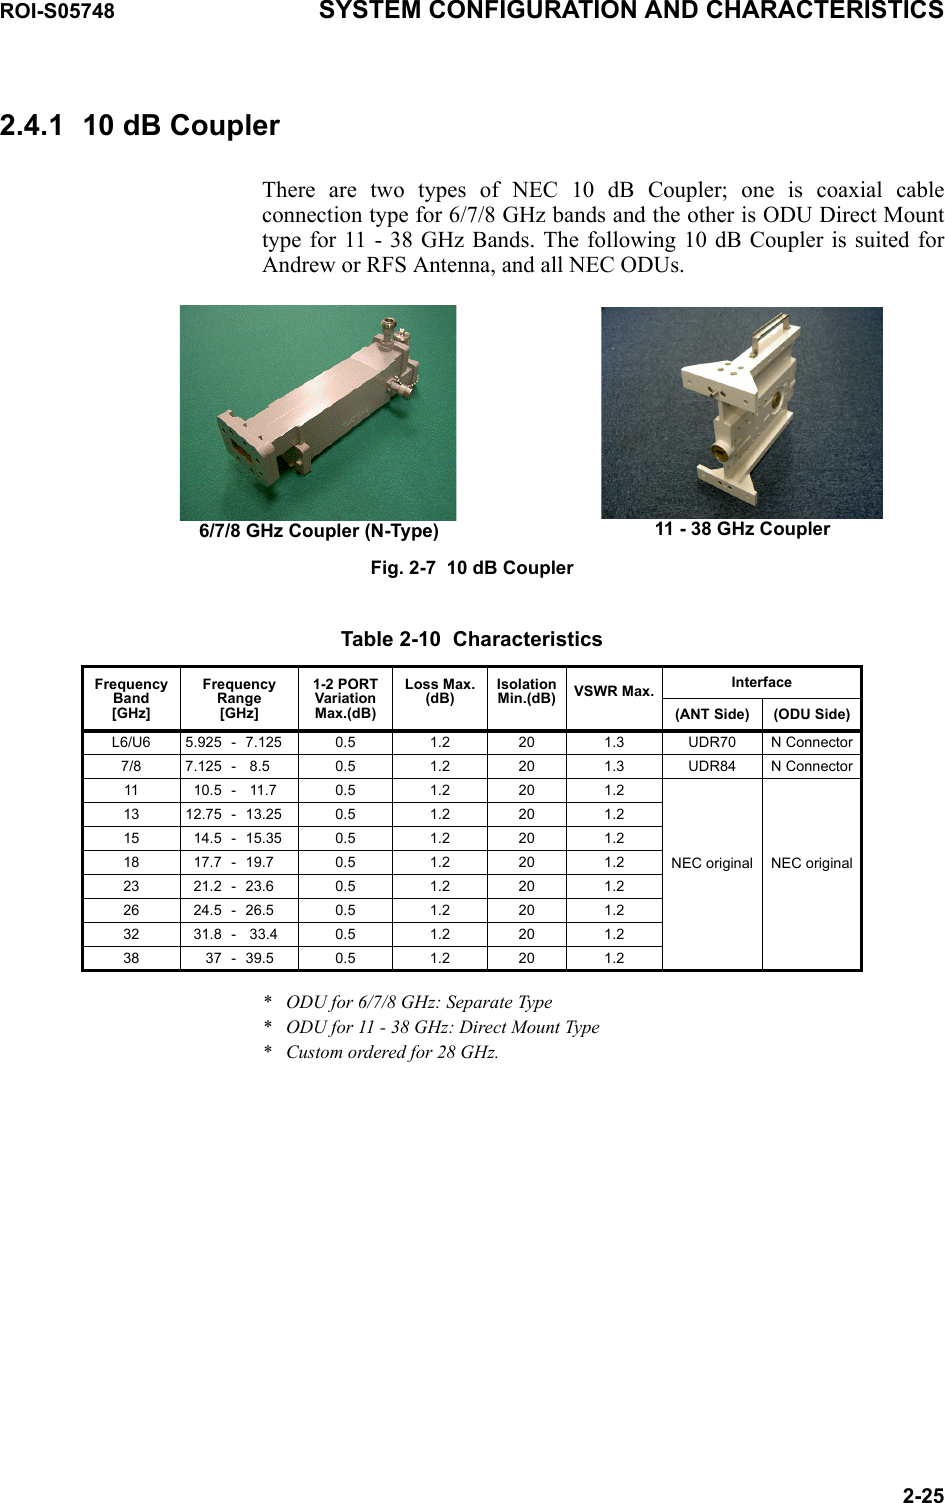 ROI-S05748 SYSTEM CONFIGURATION AND CHARACTERISTICS2-252.4.1 10 dB CouplerThere are two types of NEC 10 dB Coupler; one is coaxial cable connection type for 6/7/8 GHz bands and the other is ODU Direct Mount type for 11 - 38 GHz Bands. The following 10 dB Coupler is suited for Andrew or RFS Antenna, and all NEC ODUs. 6/7/8 GHz Coupler (N-Type) 11 - 38 GHz CouplerFig. 2-7  10 dB CouplerTable 2-10  CharacteristicsFrequency Band[GHz]Frequency Range [GHz]1-2 PORTVariation Max.(dB)Loss Max.(dB)Isolation Min.(dB) VSWR Max. Interface(ANT Side) (ODU Side)L6/U6 5.925 -7.125 0.5 1.2 20 1.3 UDR70 N Connector7/8 7.125 - 8.5 0.5 1.2 20 1.3 UDR84 N Connector11 10.5 - 11.7 0.5 1.2 20 1.2NEC original NEC original13 12.75 -13.25 0.5 1.2 20 1.215 14.5 -15.35 0.5 1.2 20 1.218 17.7 -19.7 0.5 1.2 20 1.223 21.2 -23.6 0.5 1.2 20 1.226 24.5 -26.5 0.5 1.2 20 1.232 31.8 - 33.4 0.5 1.2 20 1.238 37 -39.5 0.5 1.2 20 1.2* ODU for 6/7/8 GHz: Separate Type* ODU for 11 - 38 GHz: Direct Mount Type* Custom ordered for 28 GHz.